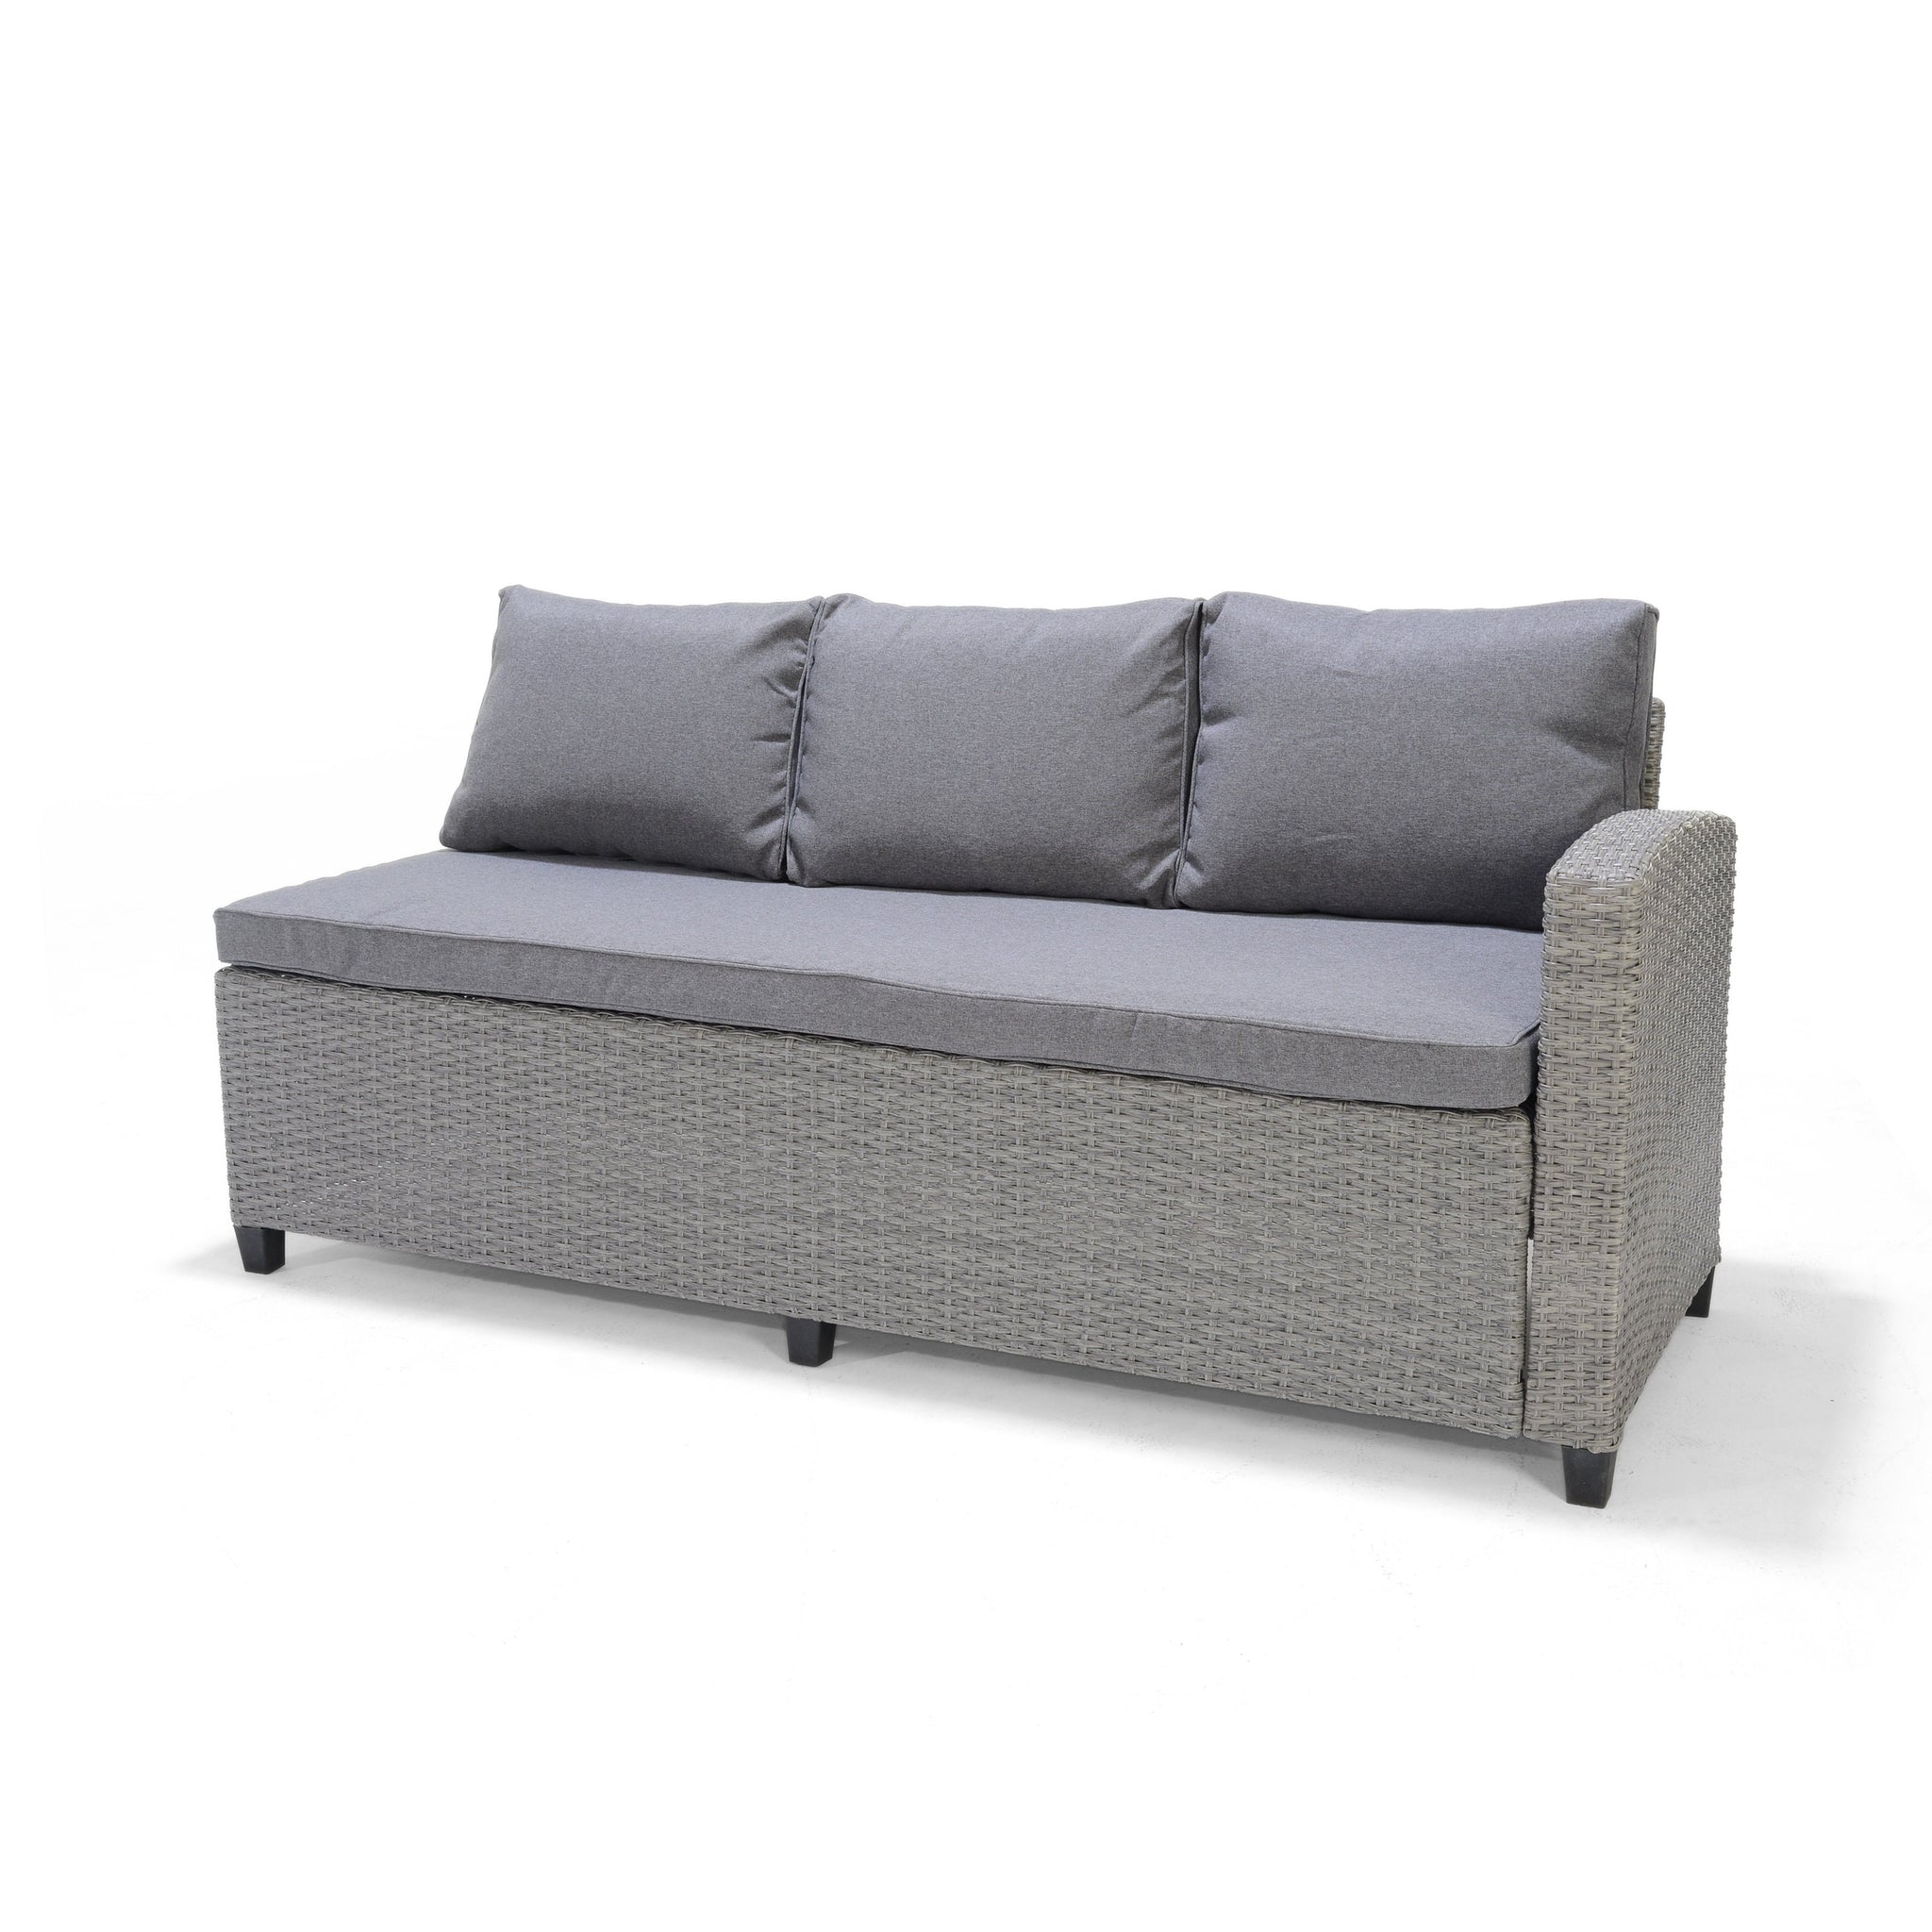 Vinh 3 Piece Wicker Sectional Seating Set - Gray with Cushions